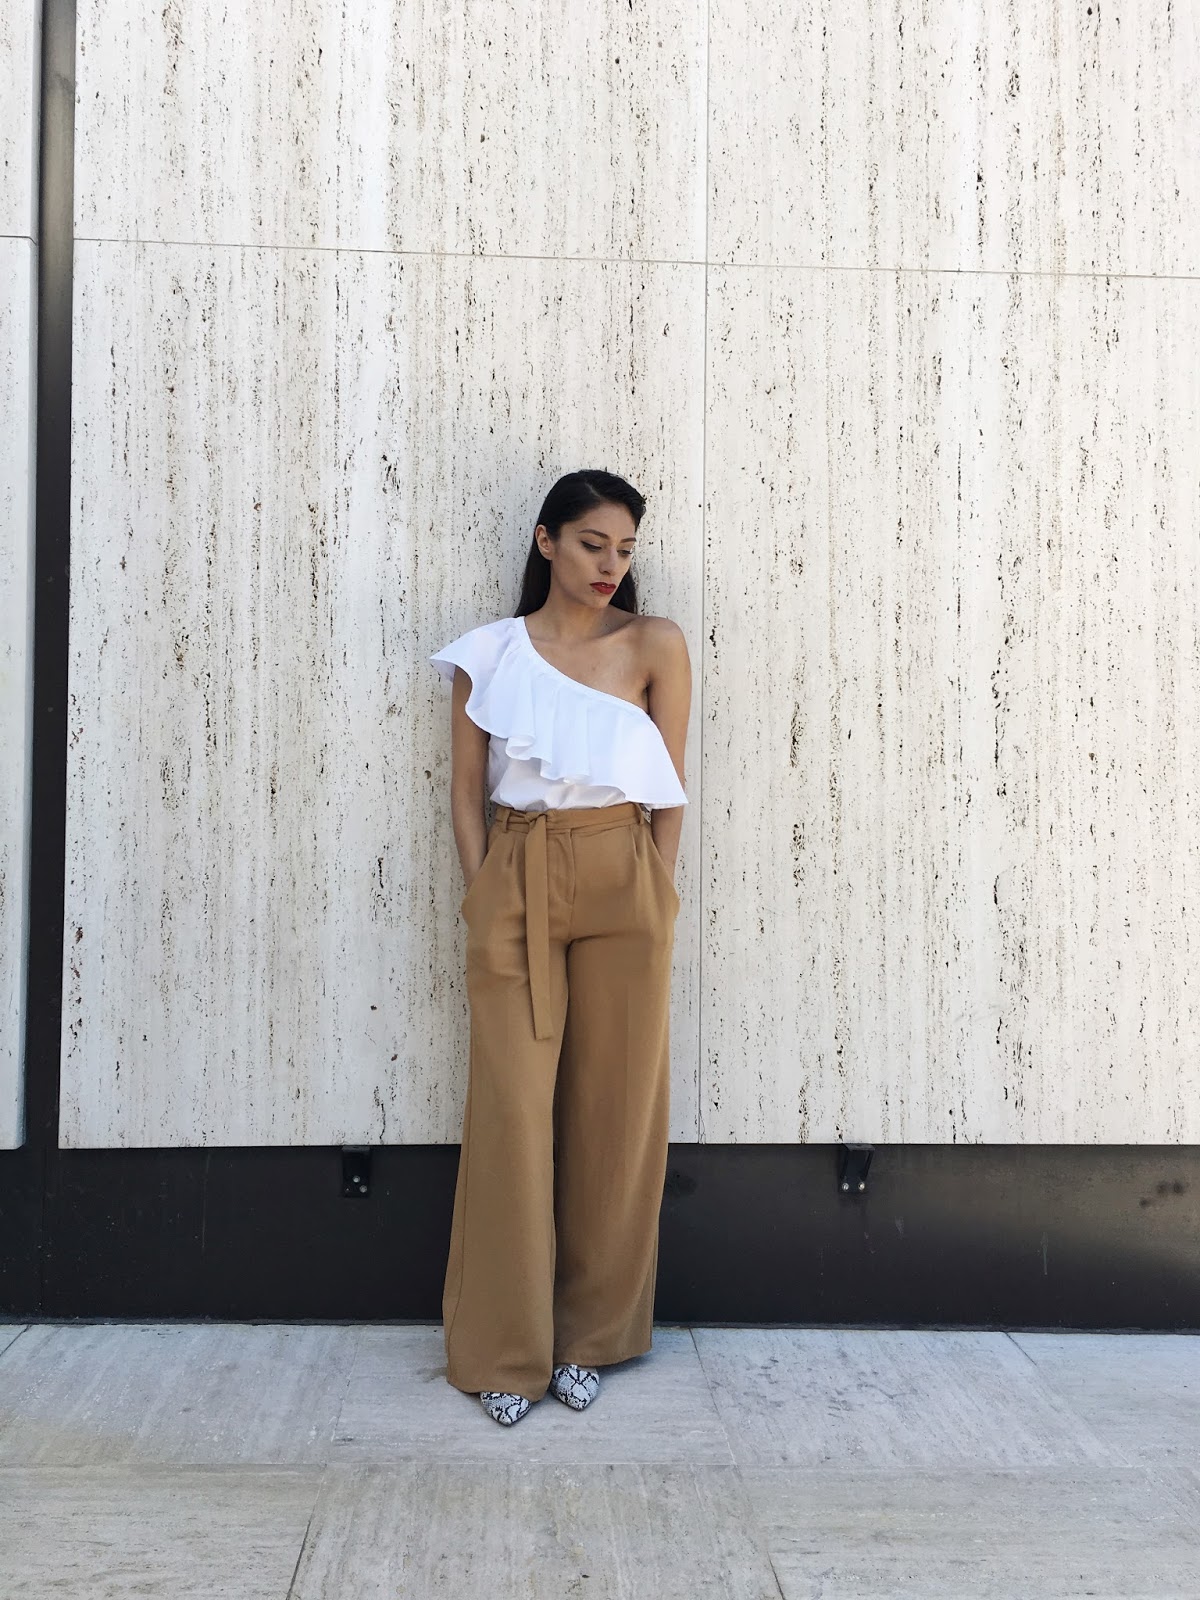 STYLE JOURNALER: THE YELLOW PANTS